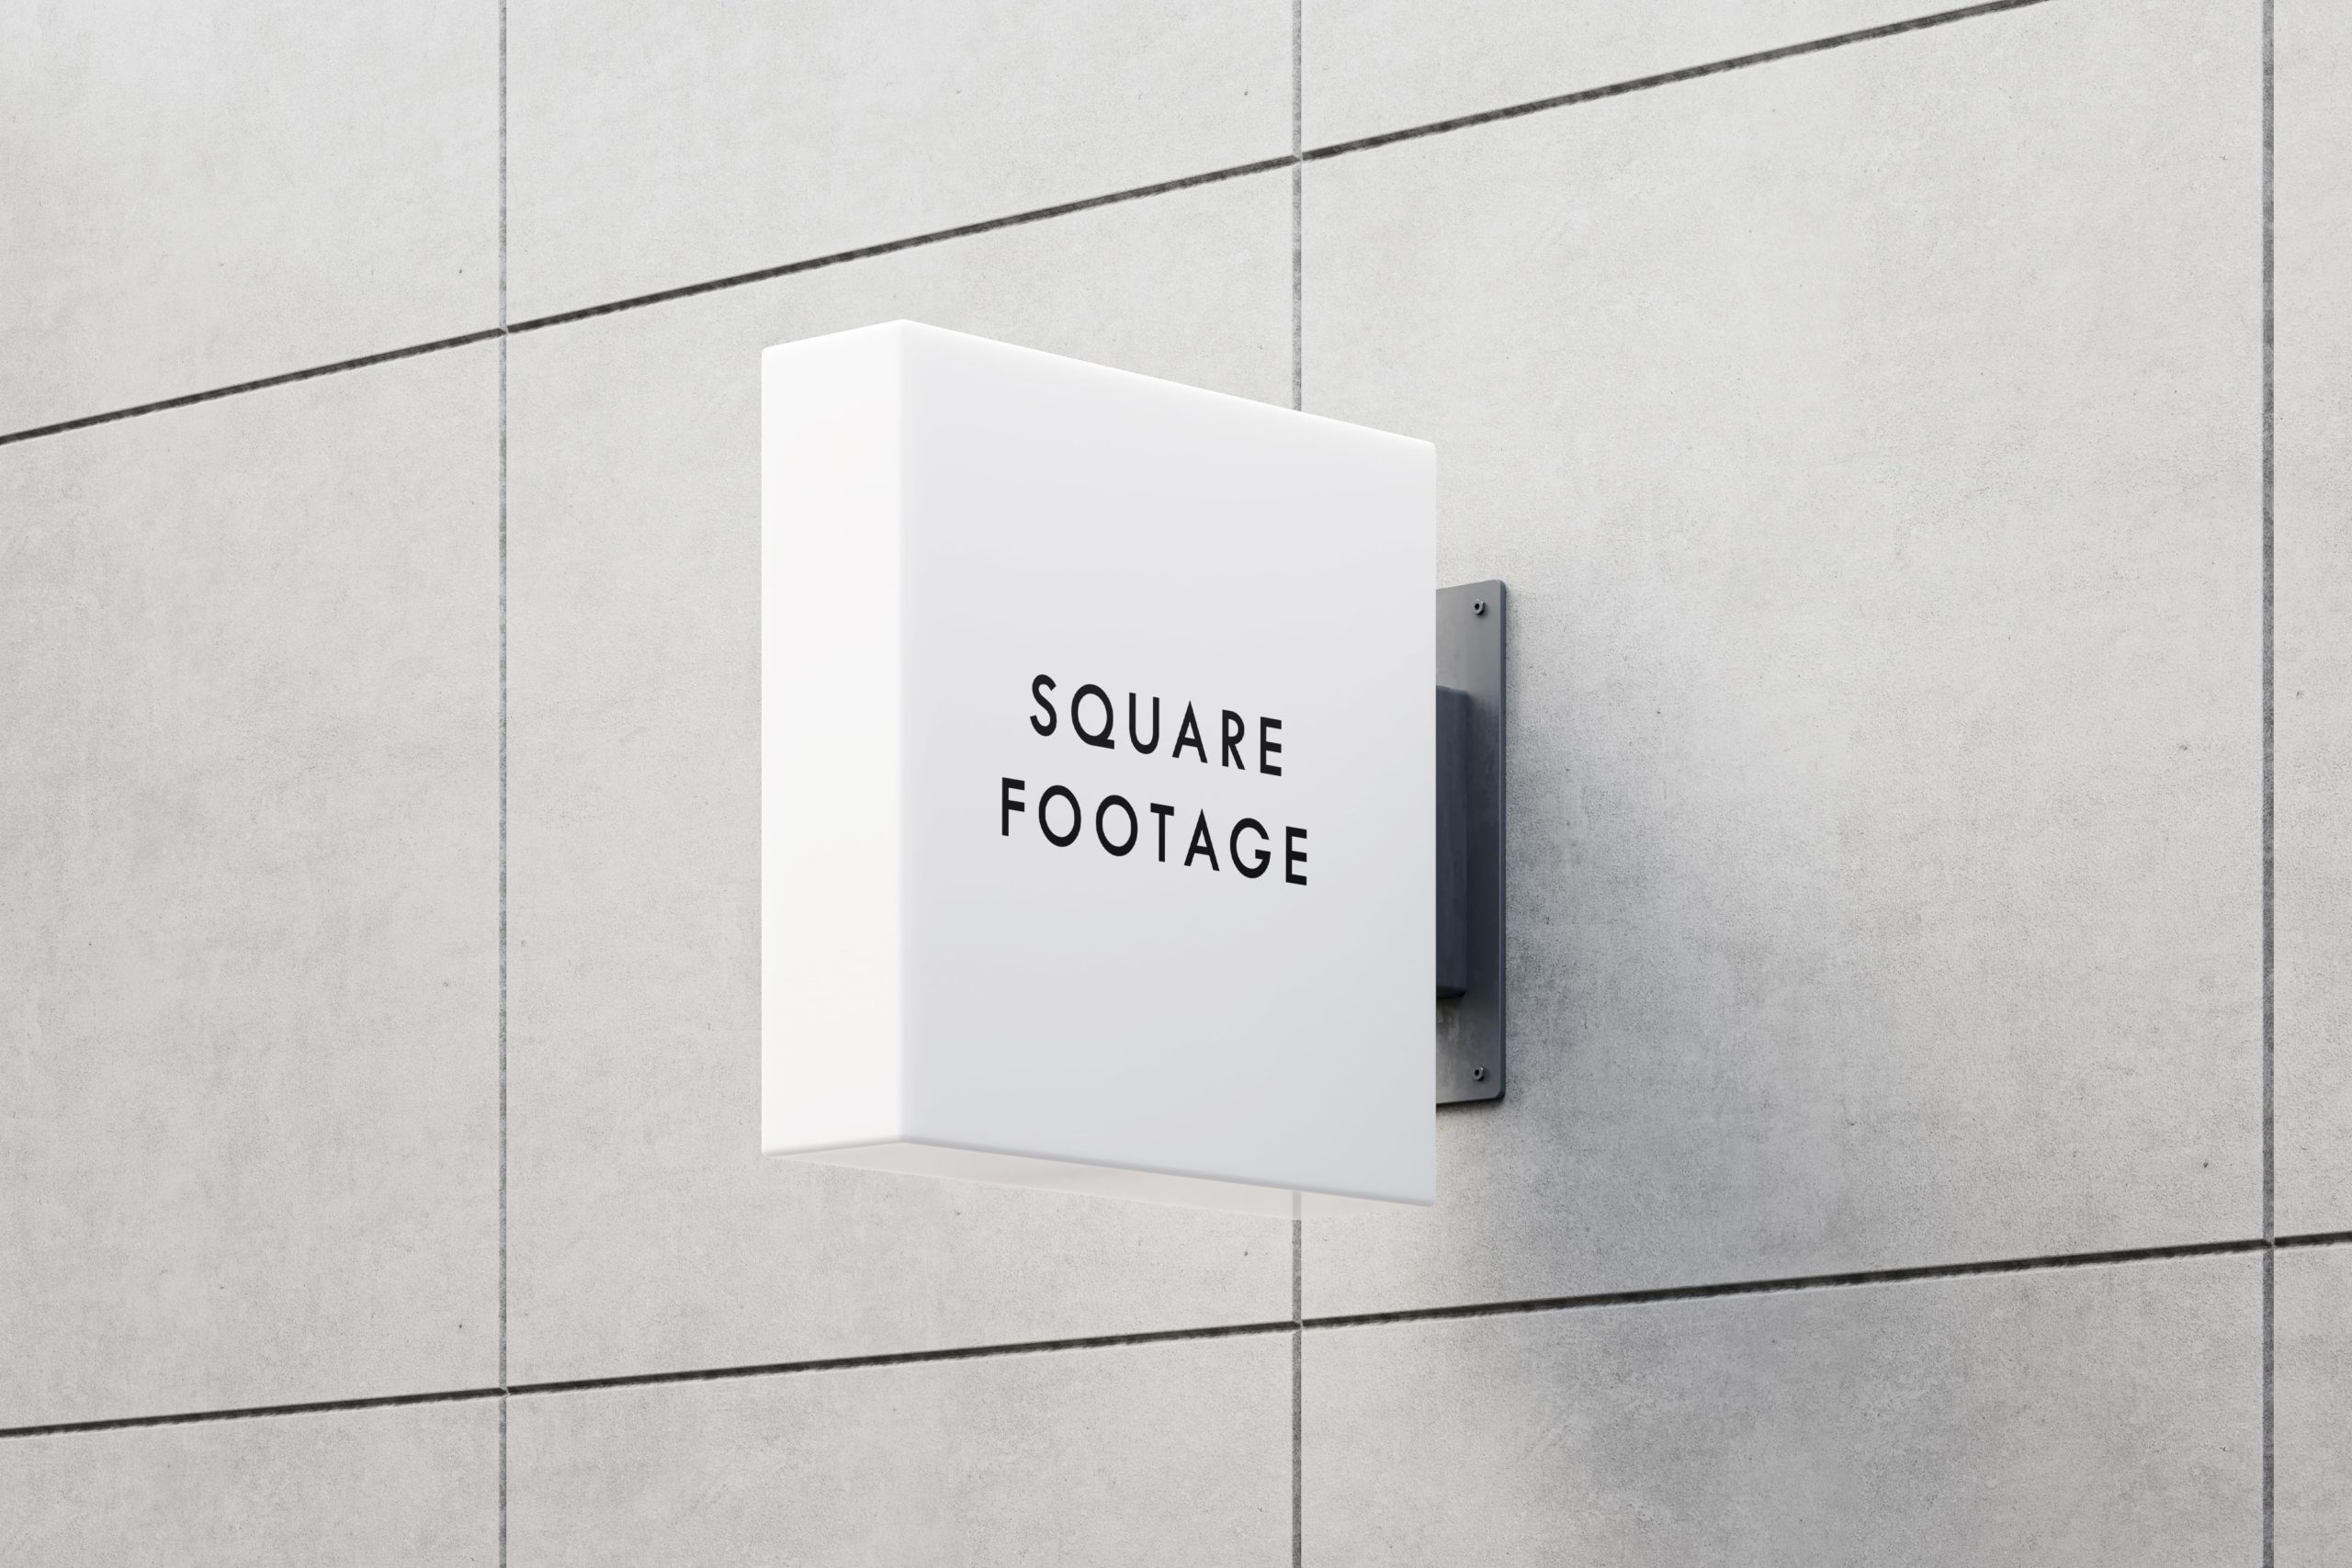 sq-footage-sign